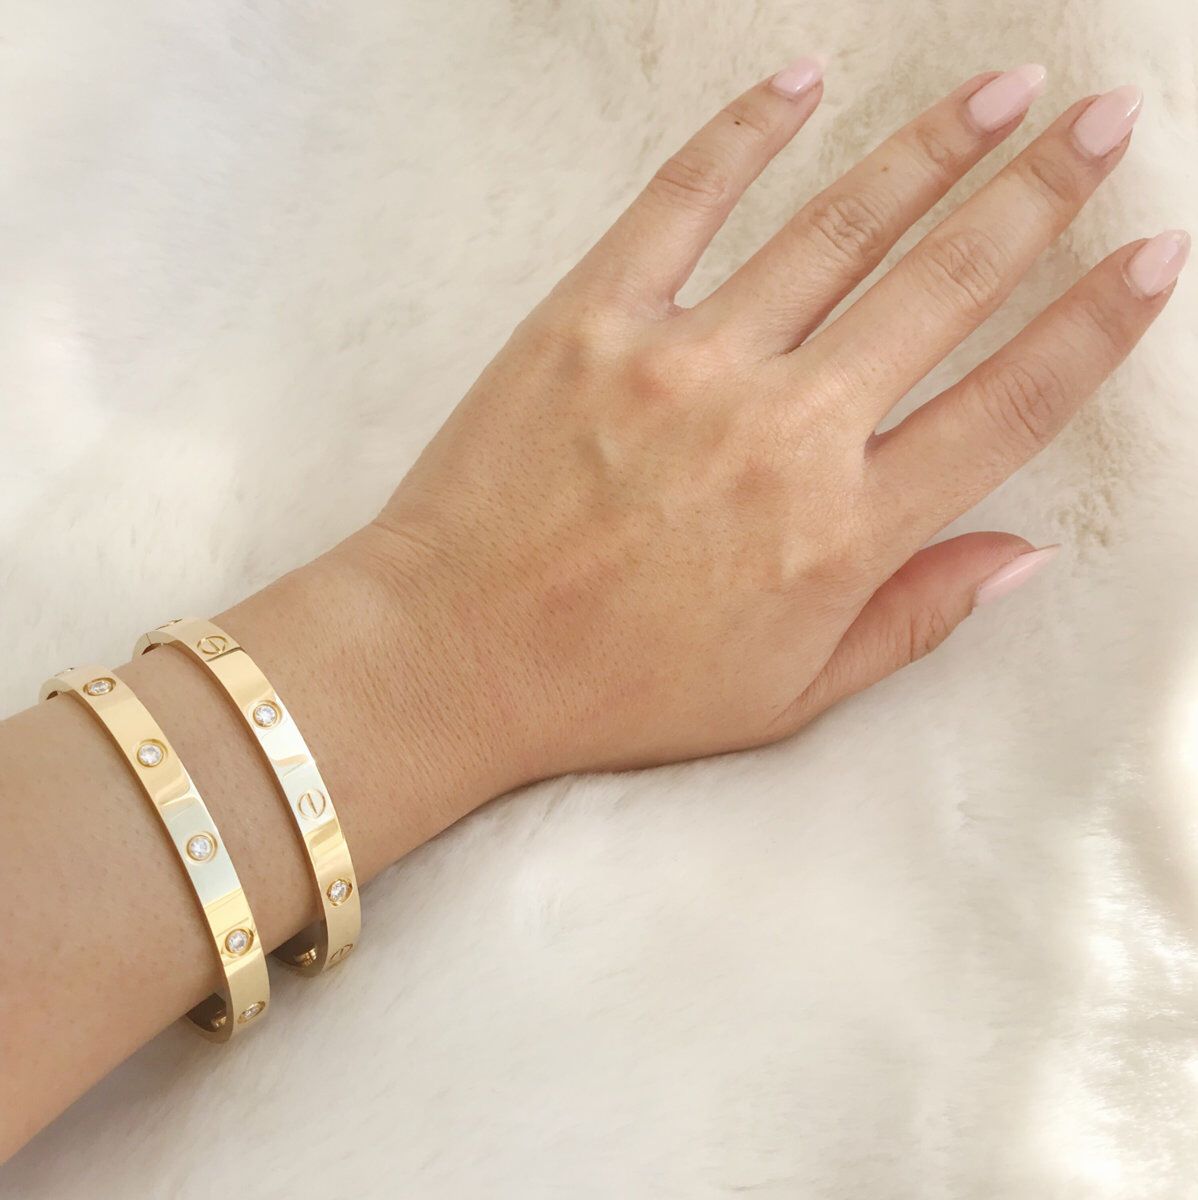 🌞 Every day, wearing bracelets bestows a sense of daily elegance. They are not just fashion; they are a way of telling the world who you are and how you feel. 👗💫
#GiftsHer #GiftsYou #GiftsForWife #GiftsForLove #GiftsForMom #GiftsForDaughter #Bracelet #jewelrylover